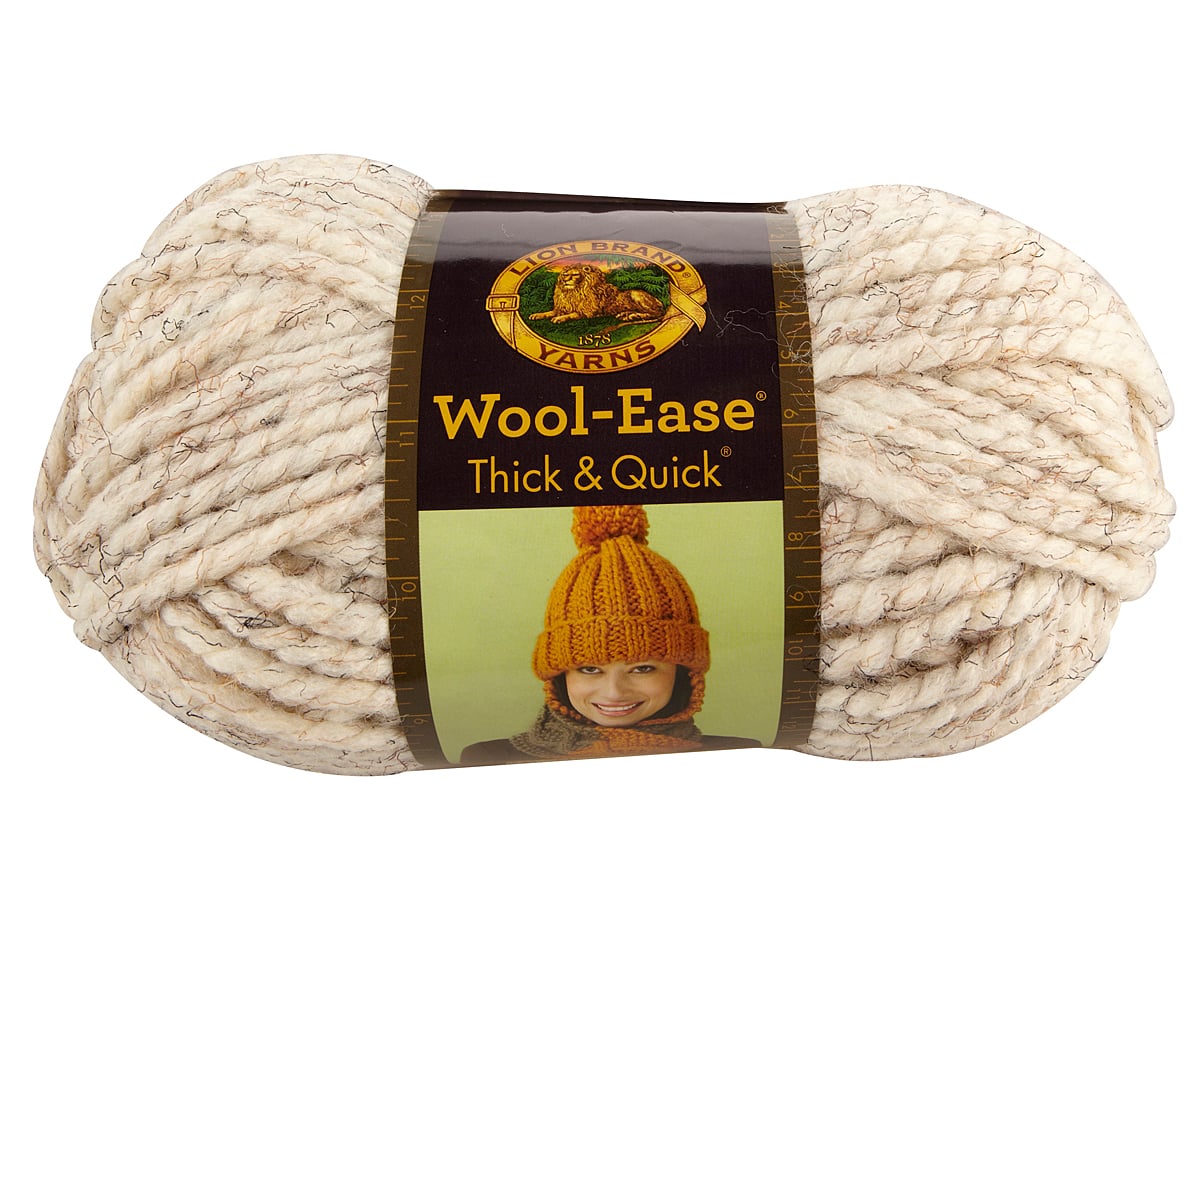 LION BRAND WOOL Ease Thick and Quick Yarn Blossom 6 Oz/170g 106 Yd